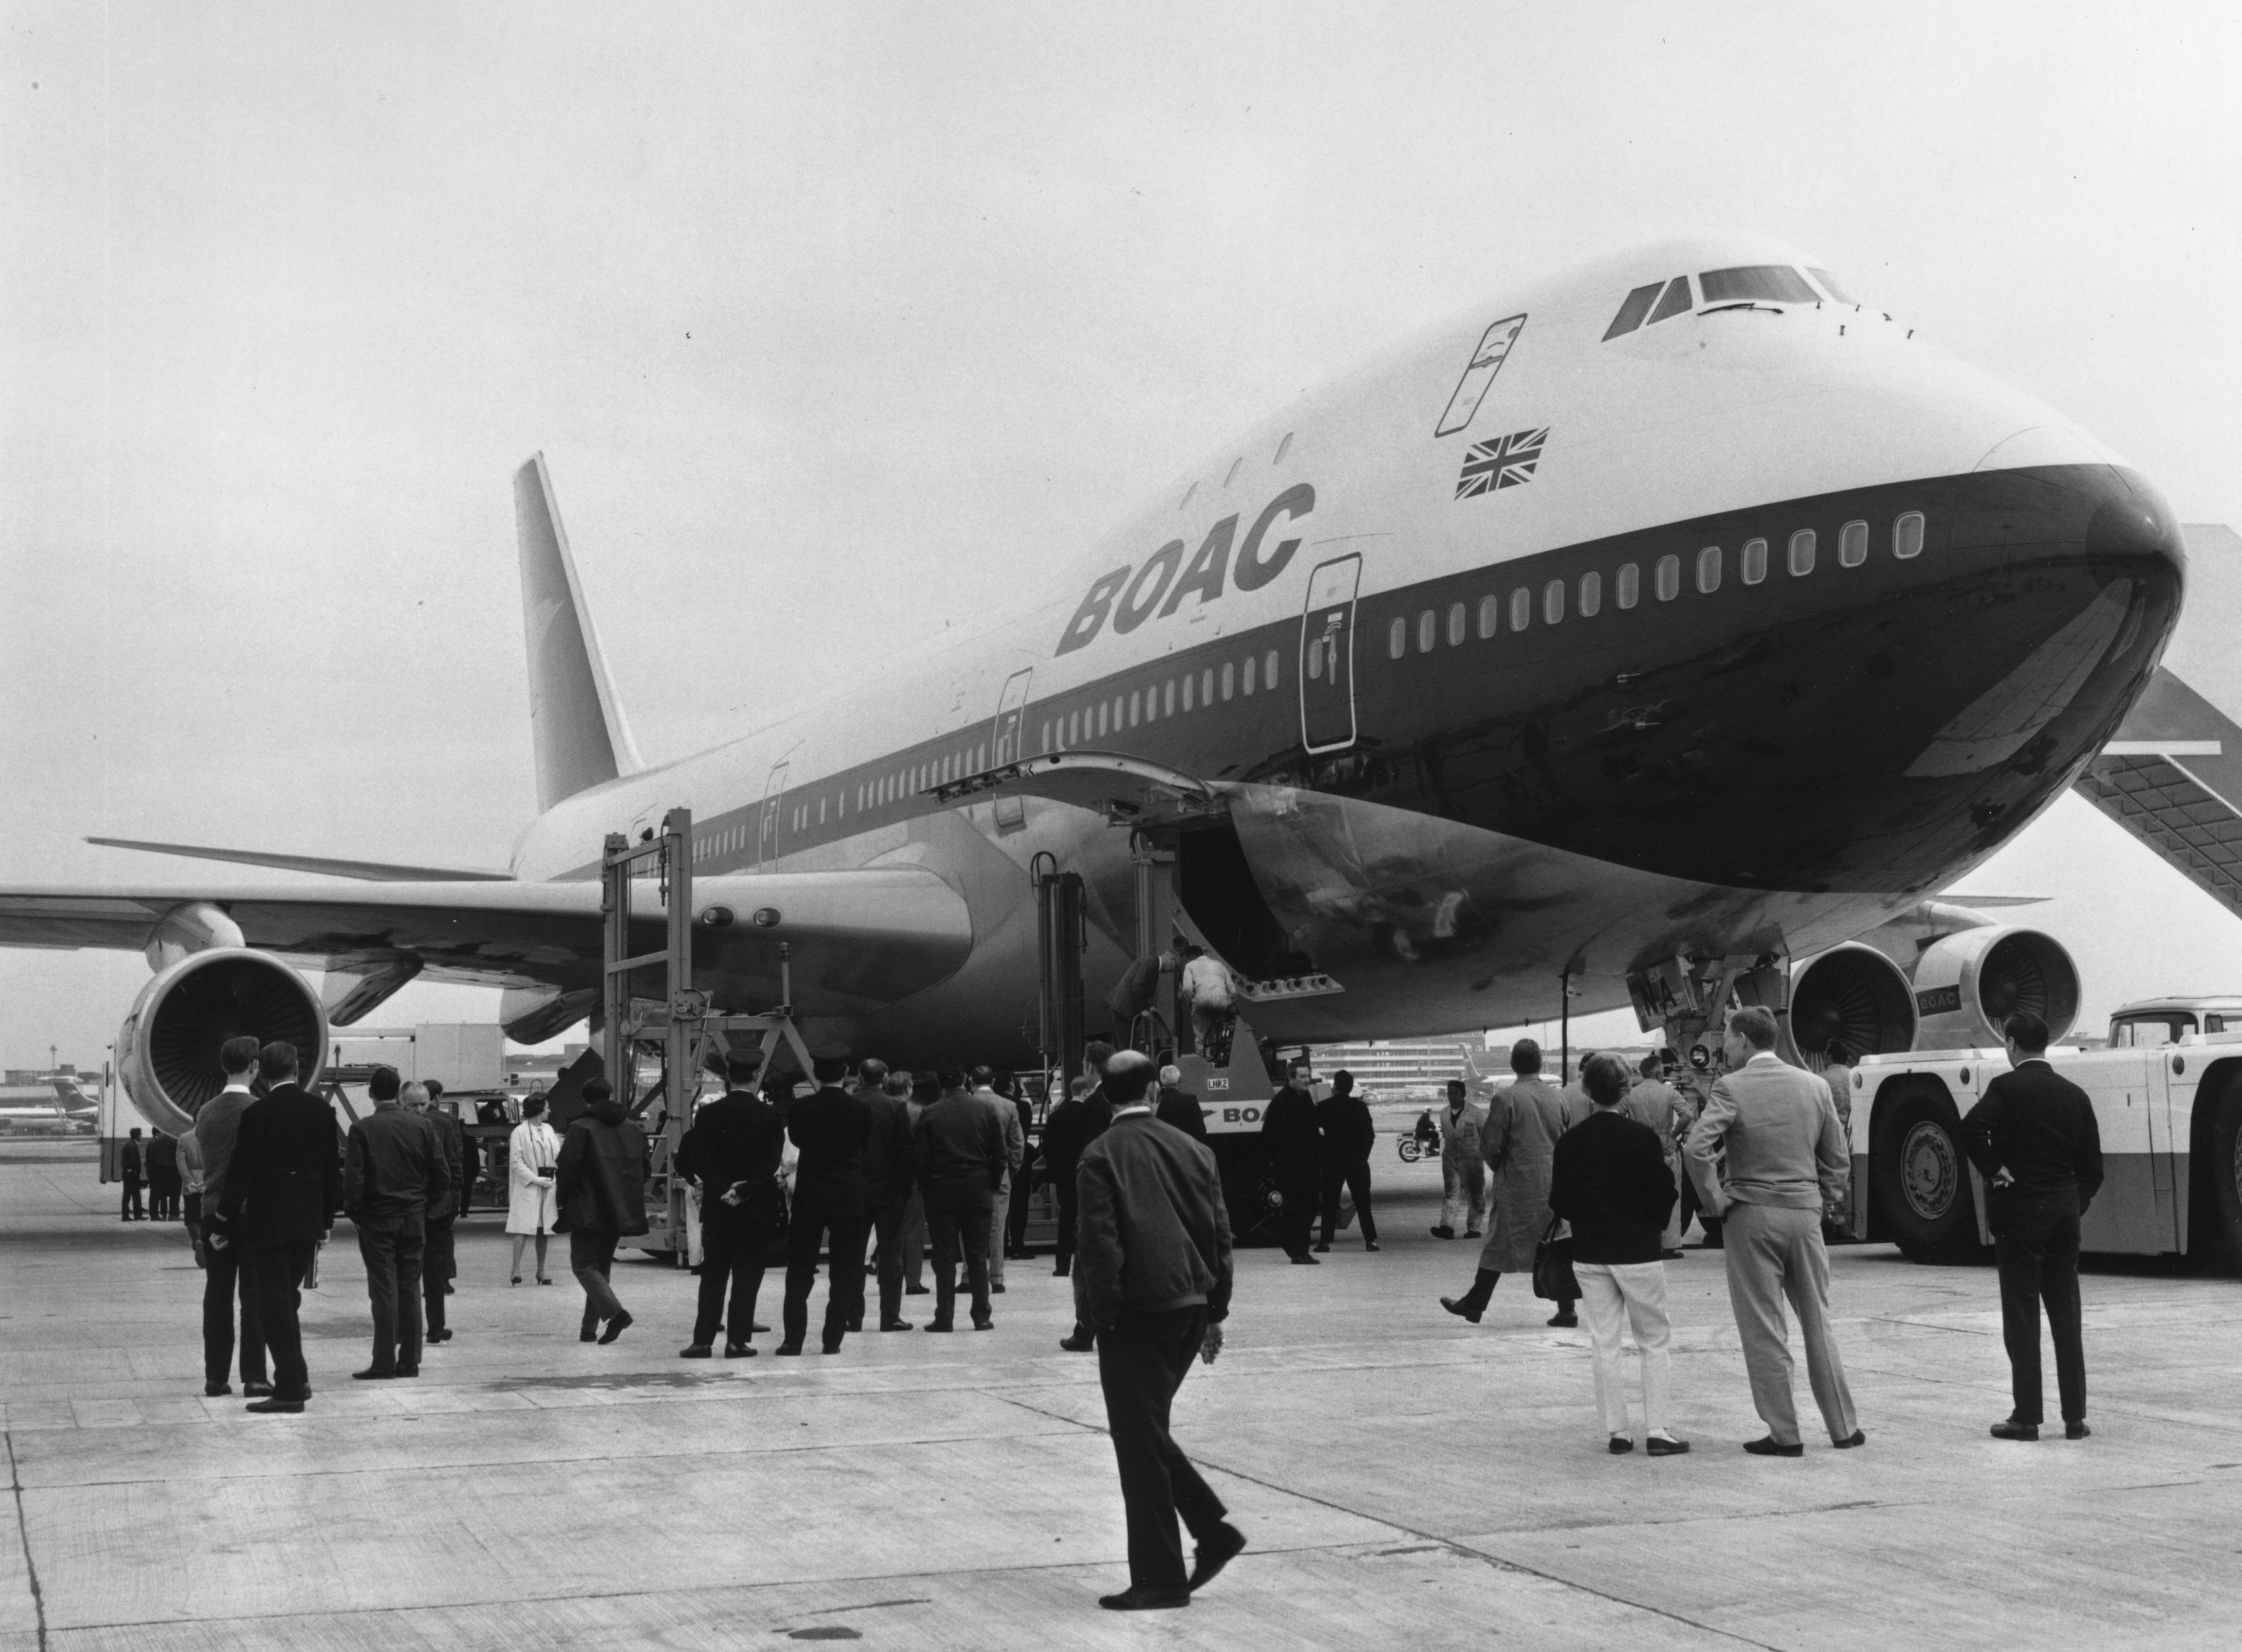 The first Boeing 747 to be operated by the British Overseas Airways Corporation (BOAC) arrives at London's Heathrow Airport, London, 23rd May 1970. Image: Jimmy Wilds / Keystone / Hulton Archive / Getty Images)